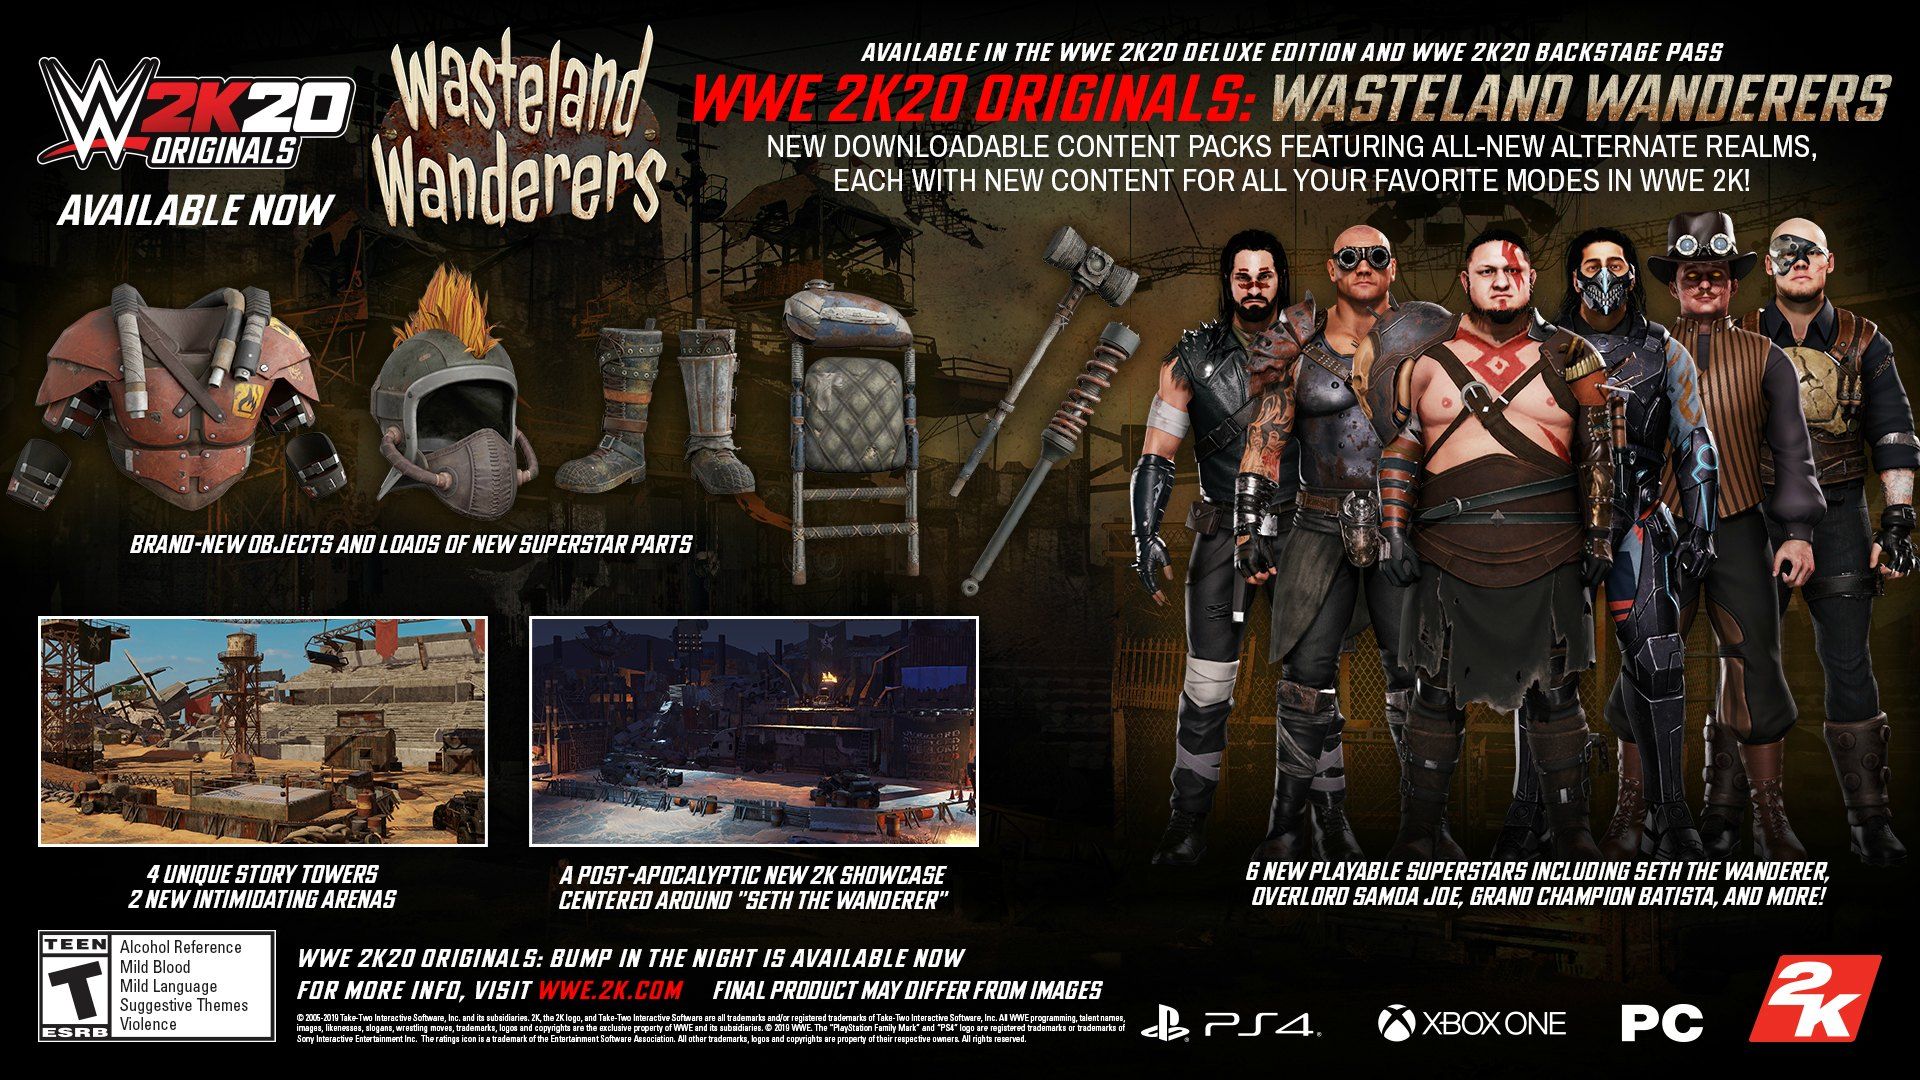 Wwe 2k20 Originals Wasteland Wanderers Available Now - wwe 2k18 roblox fin balor music codes